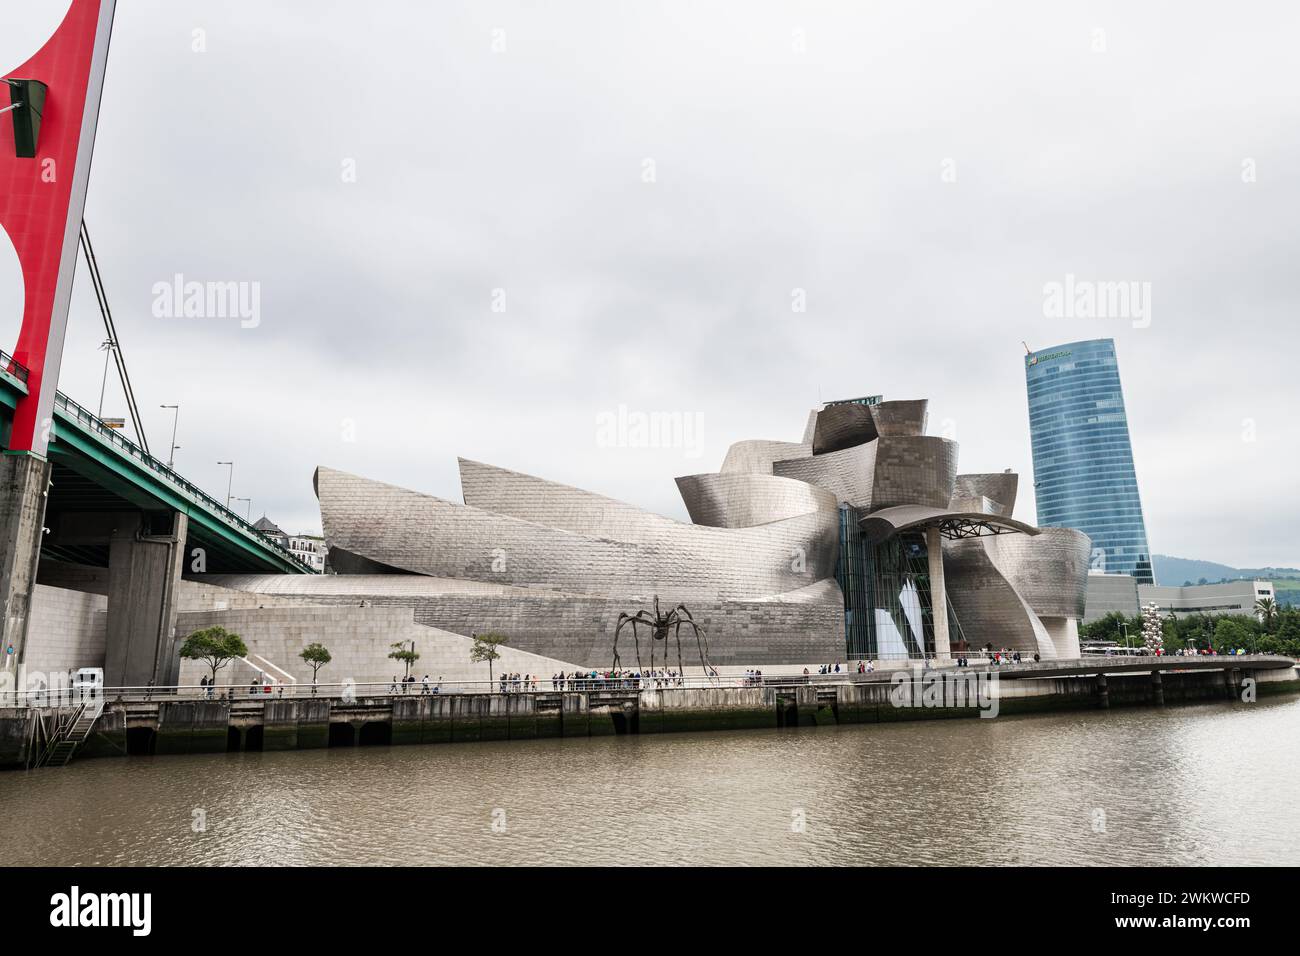 BILBAO, SPAIN - JUNE 14, 2023: Panoramic view of the Guggenheim Museum and the Iberdrola Tower on the bank of the Nervion river in Bilbao, Spain. Stock Photo